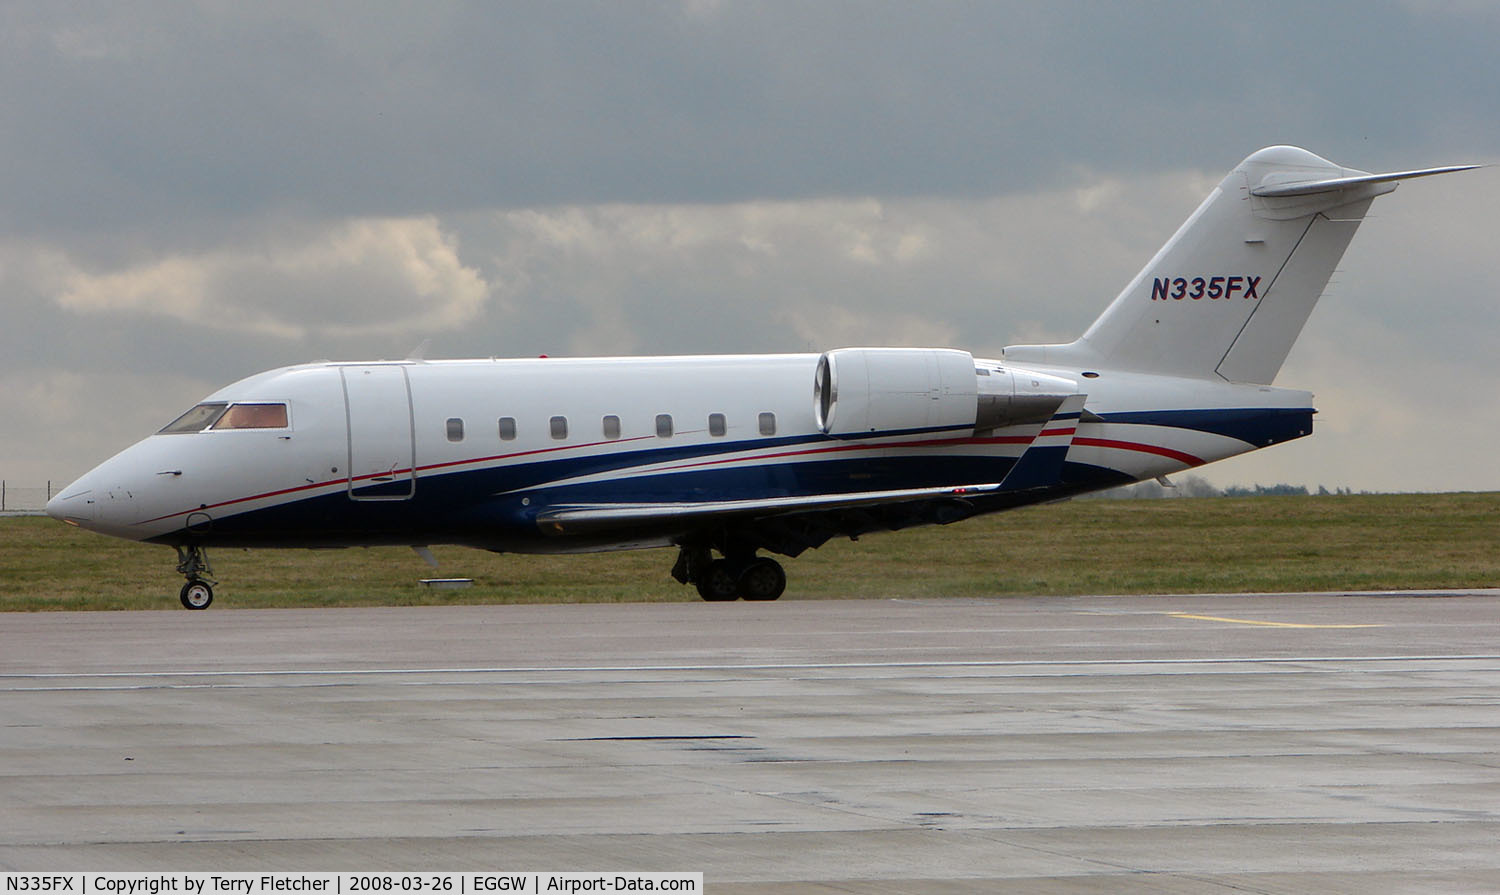 N335FX, 2005 Bombardier Challenger 604 (CL-600-2B16) C/N 5619, Challenger 604 at Luton in March 2008